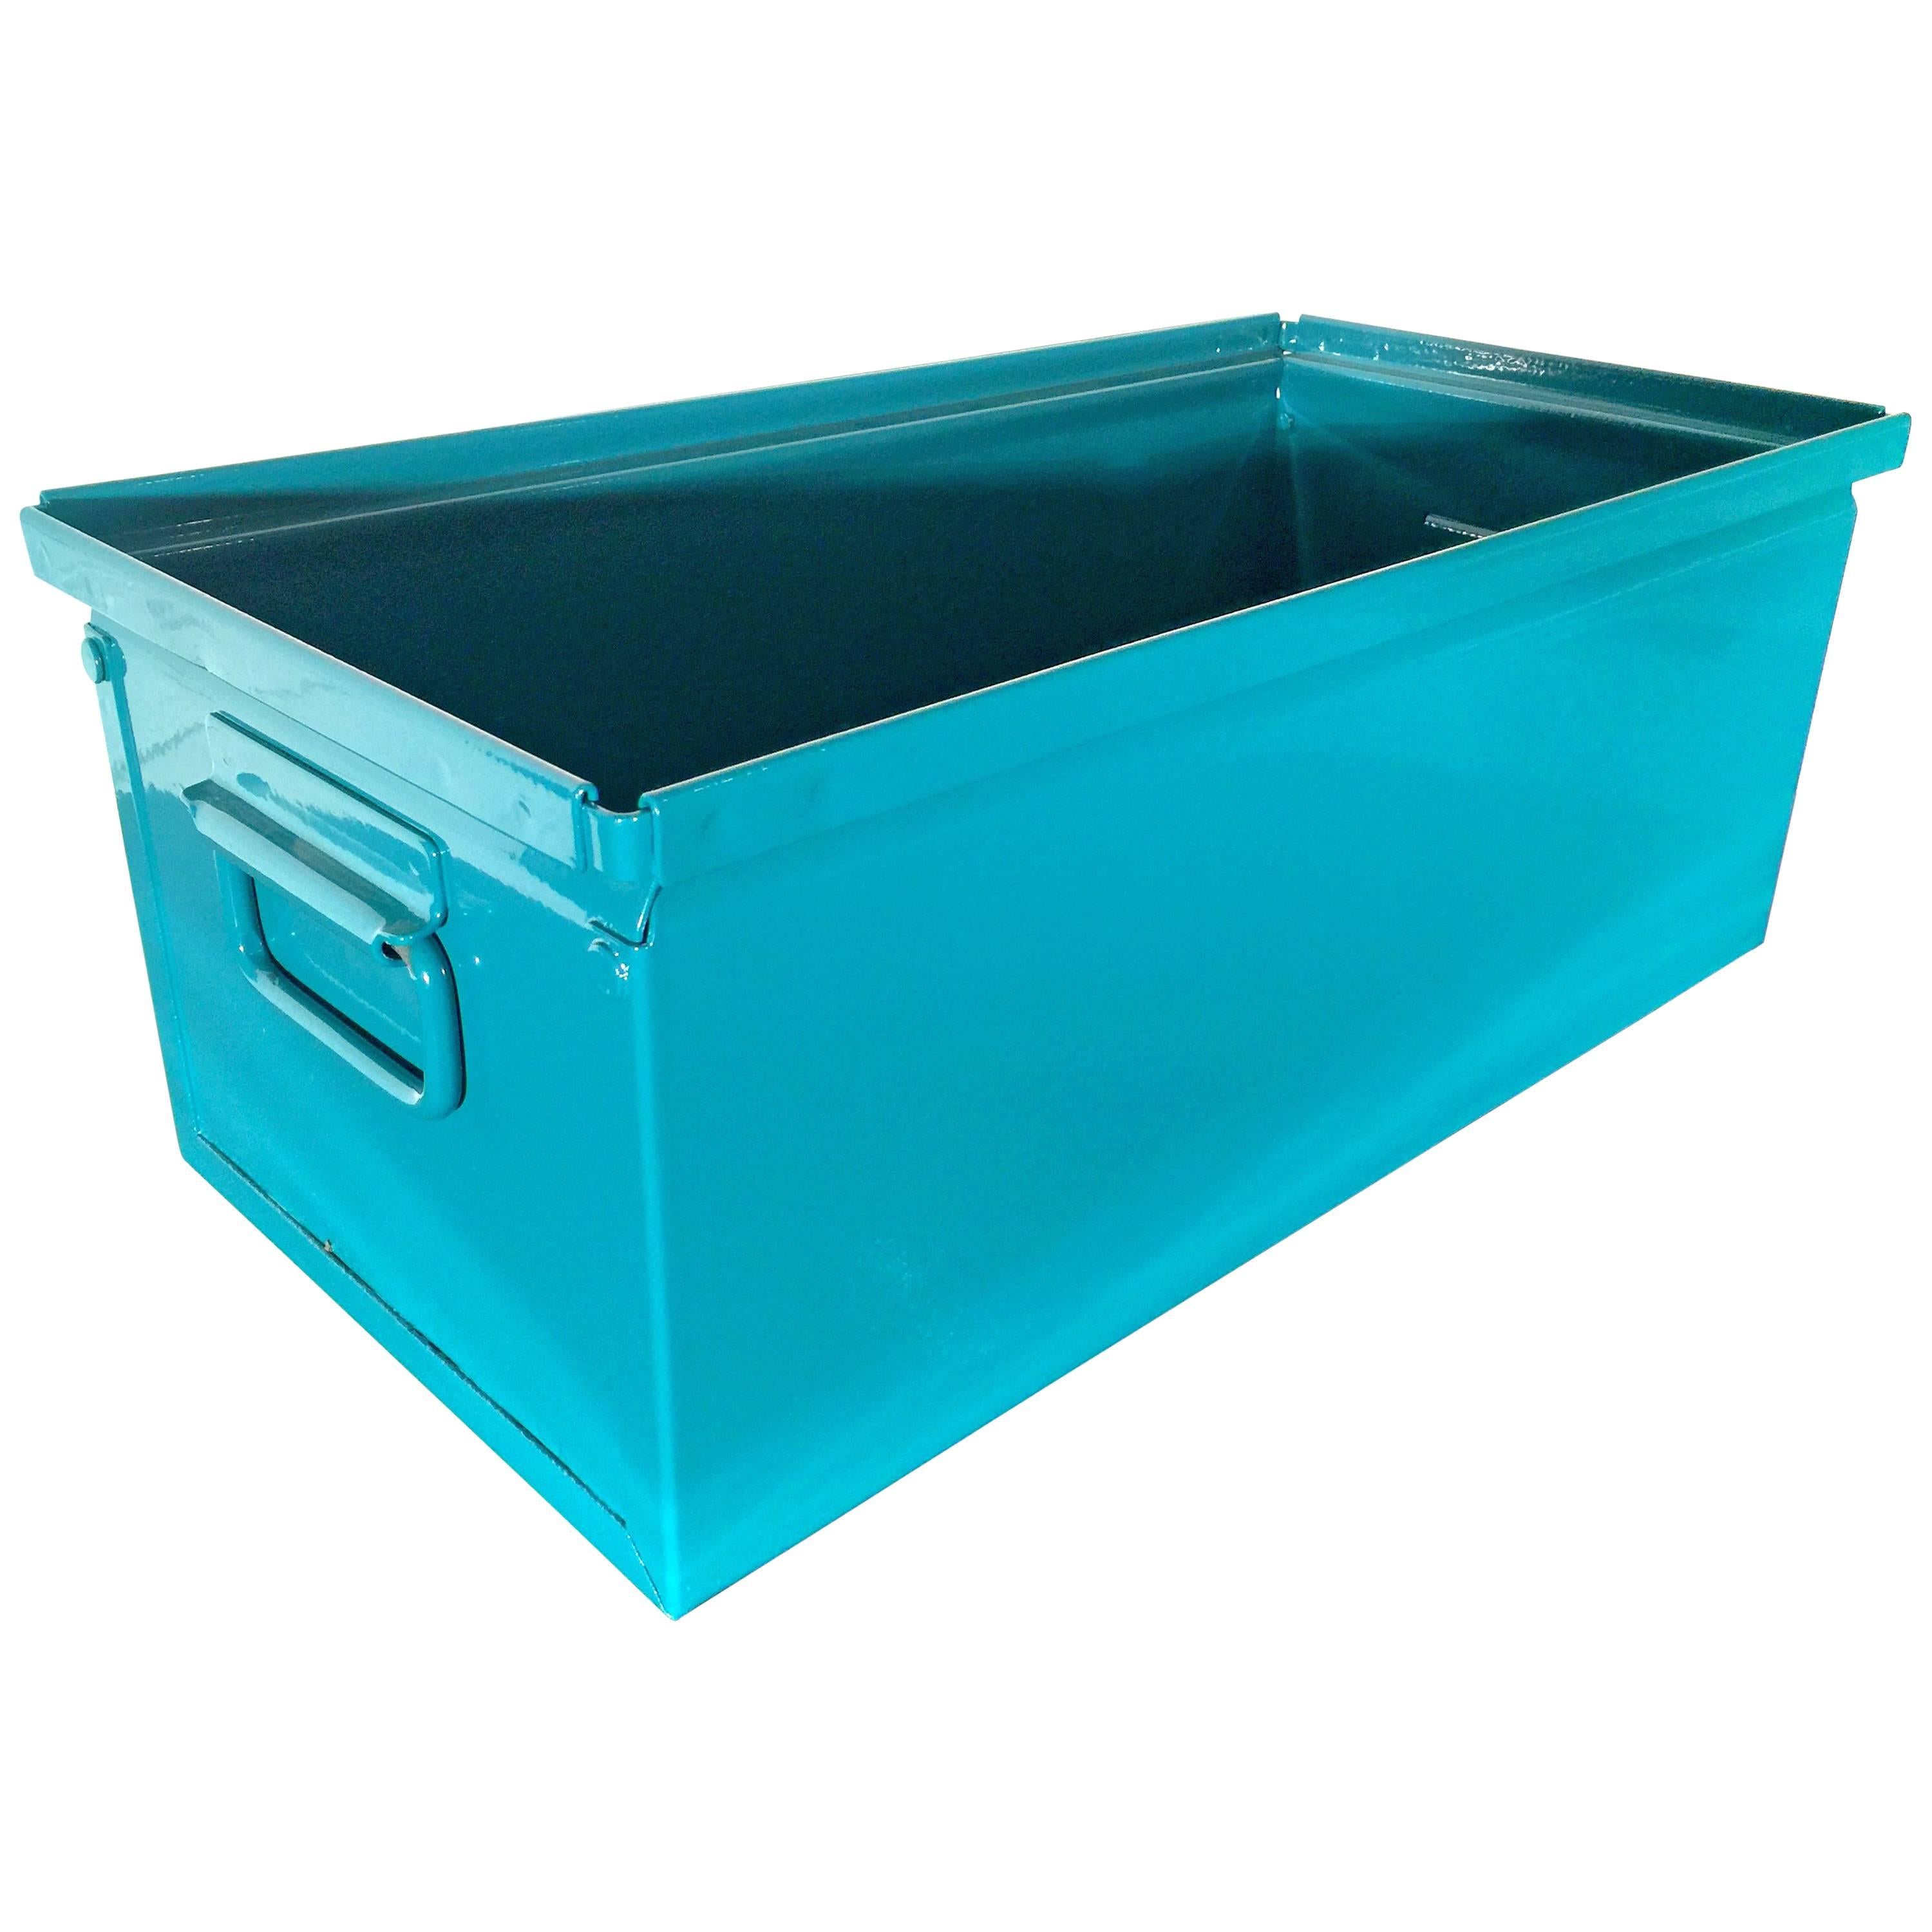 1940s Industrial Storage Bin, Refinished in Teal